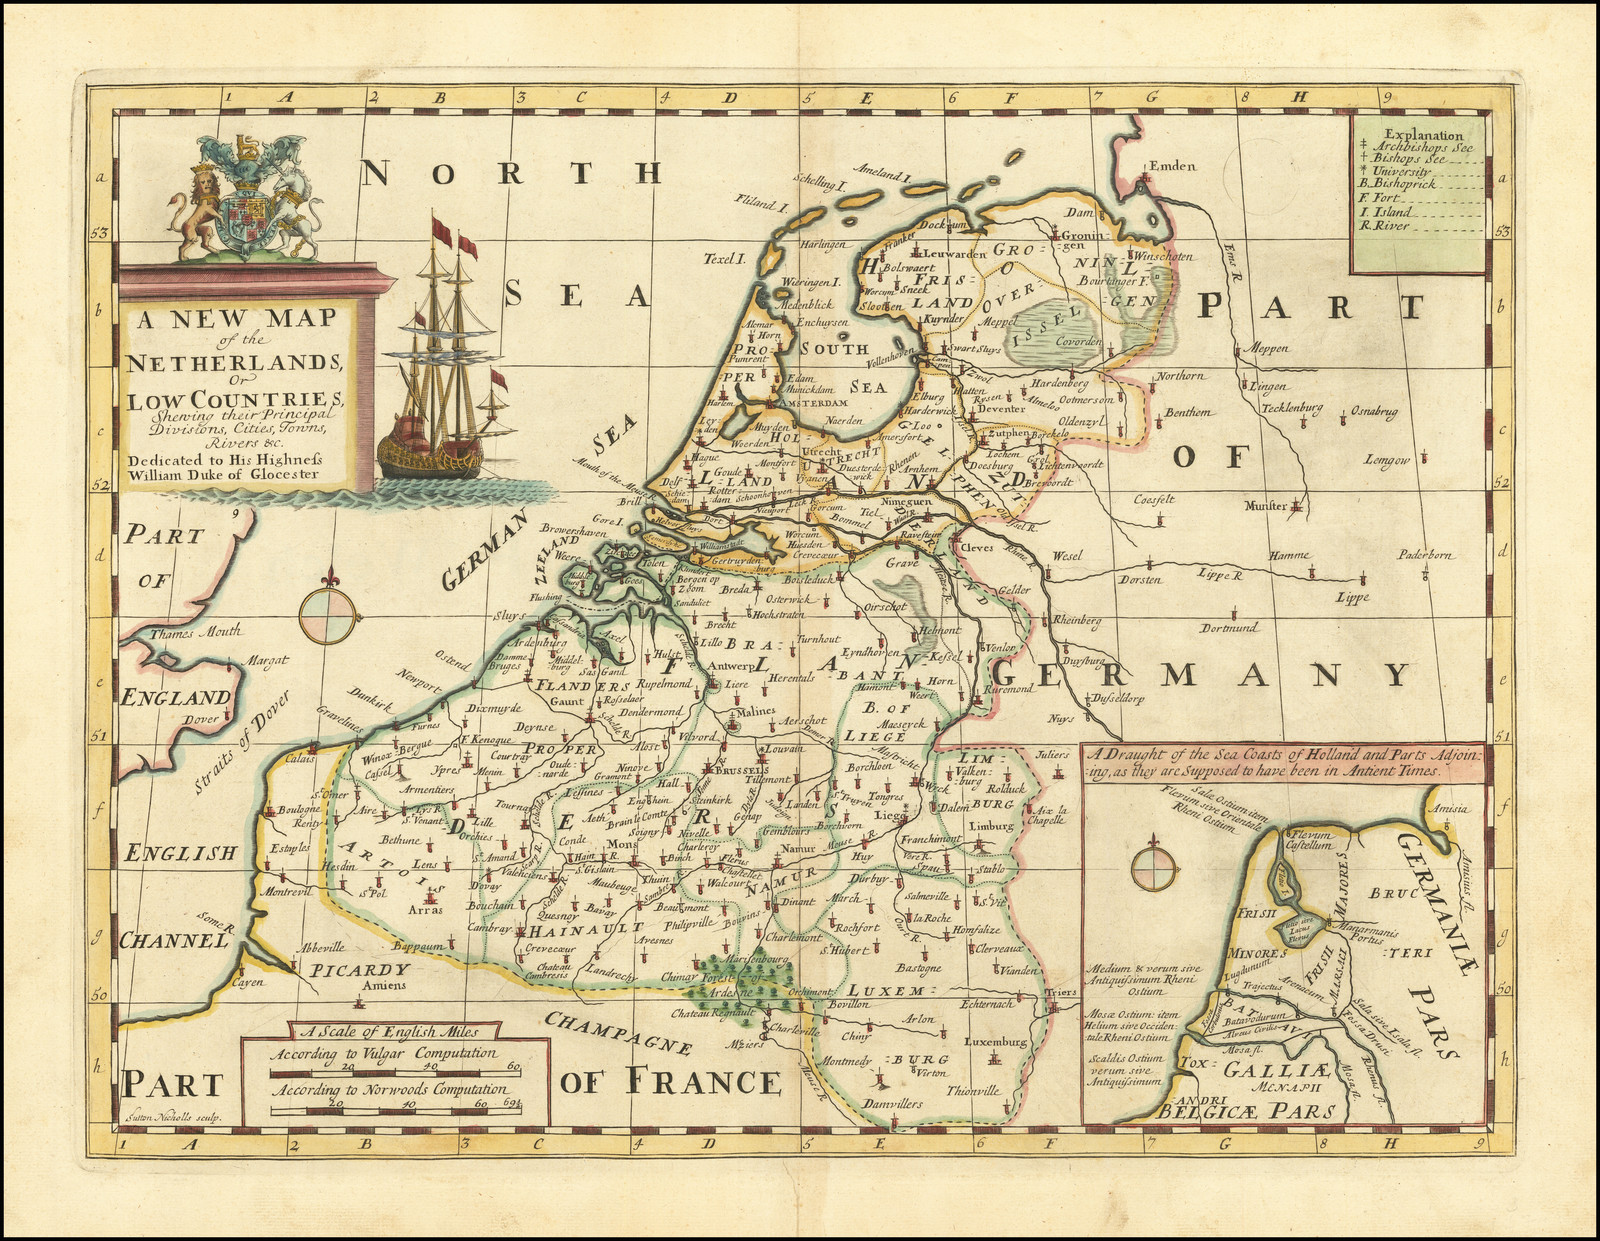 A New Map of the Netherlands or Low Countries, Shewing their Principal Divisions, Cities, Towns, Rivers, &c.  Dedicated to his Highness William Duke of Gloucester